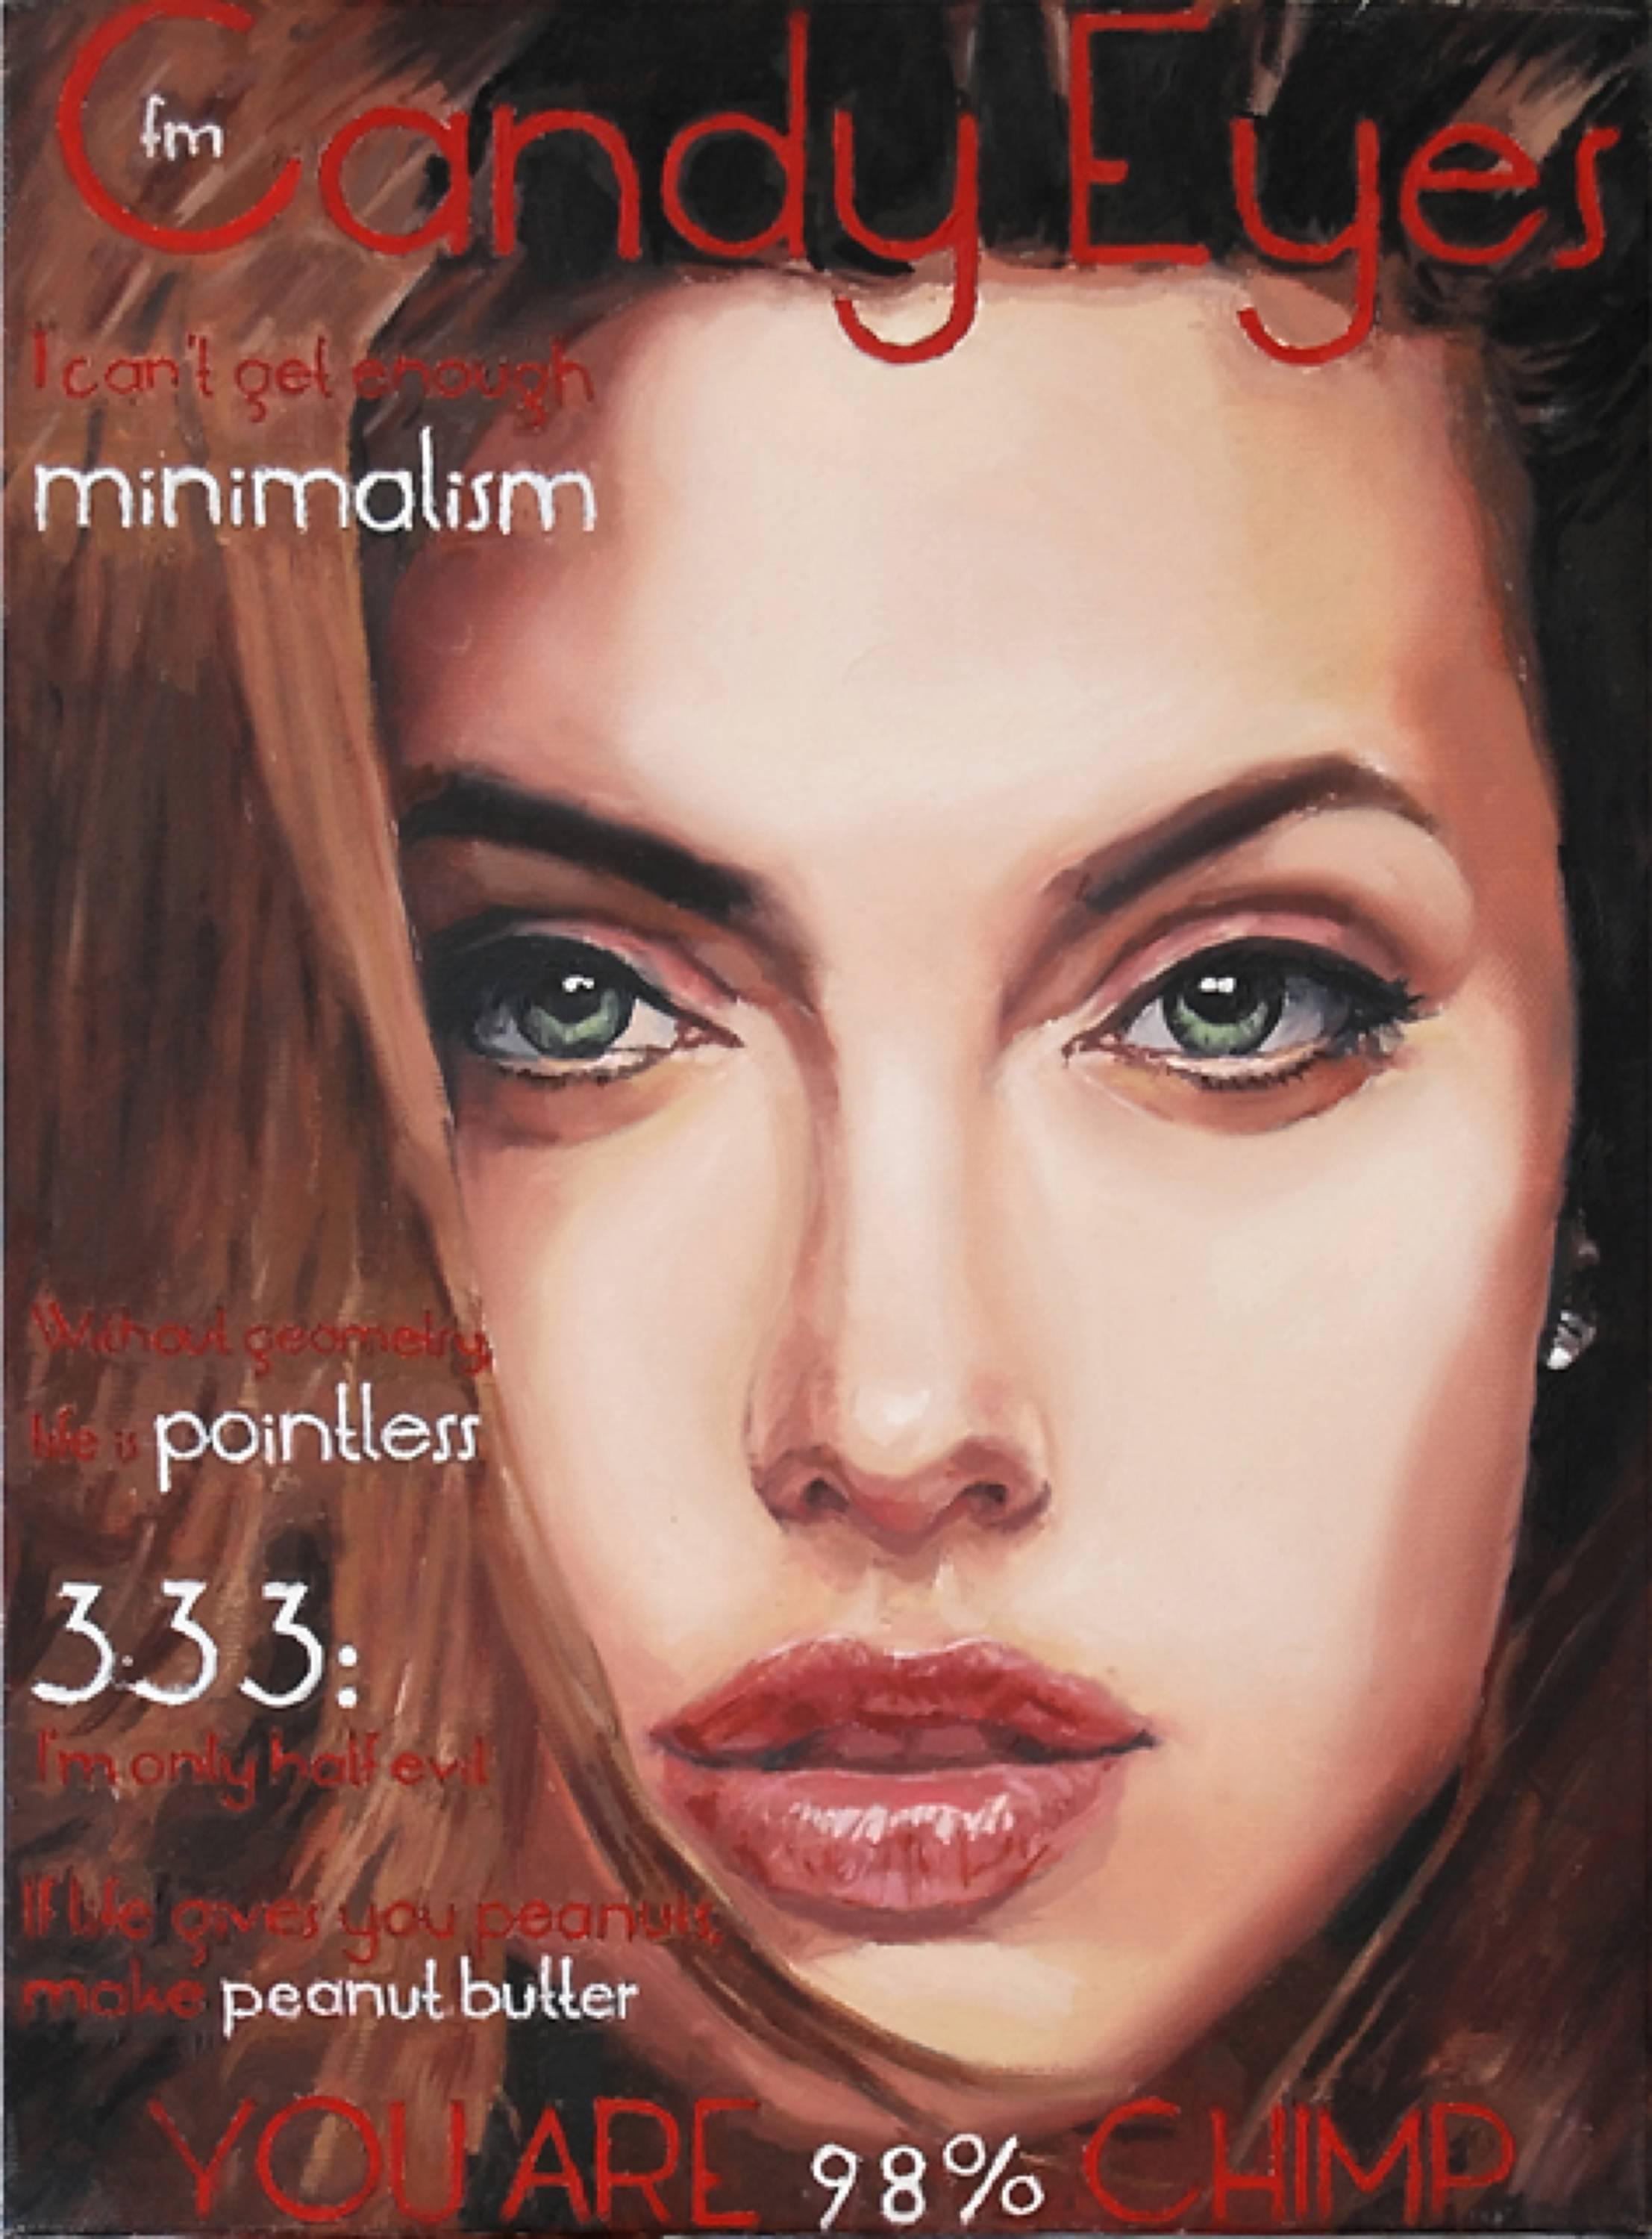 Candy Eyes issue #2 - 21st Century, Portrait, Red, Green Eyes, Figurative, Woman